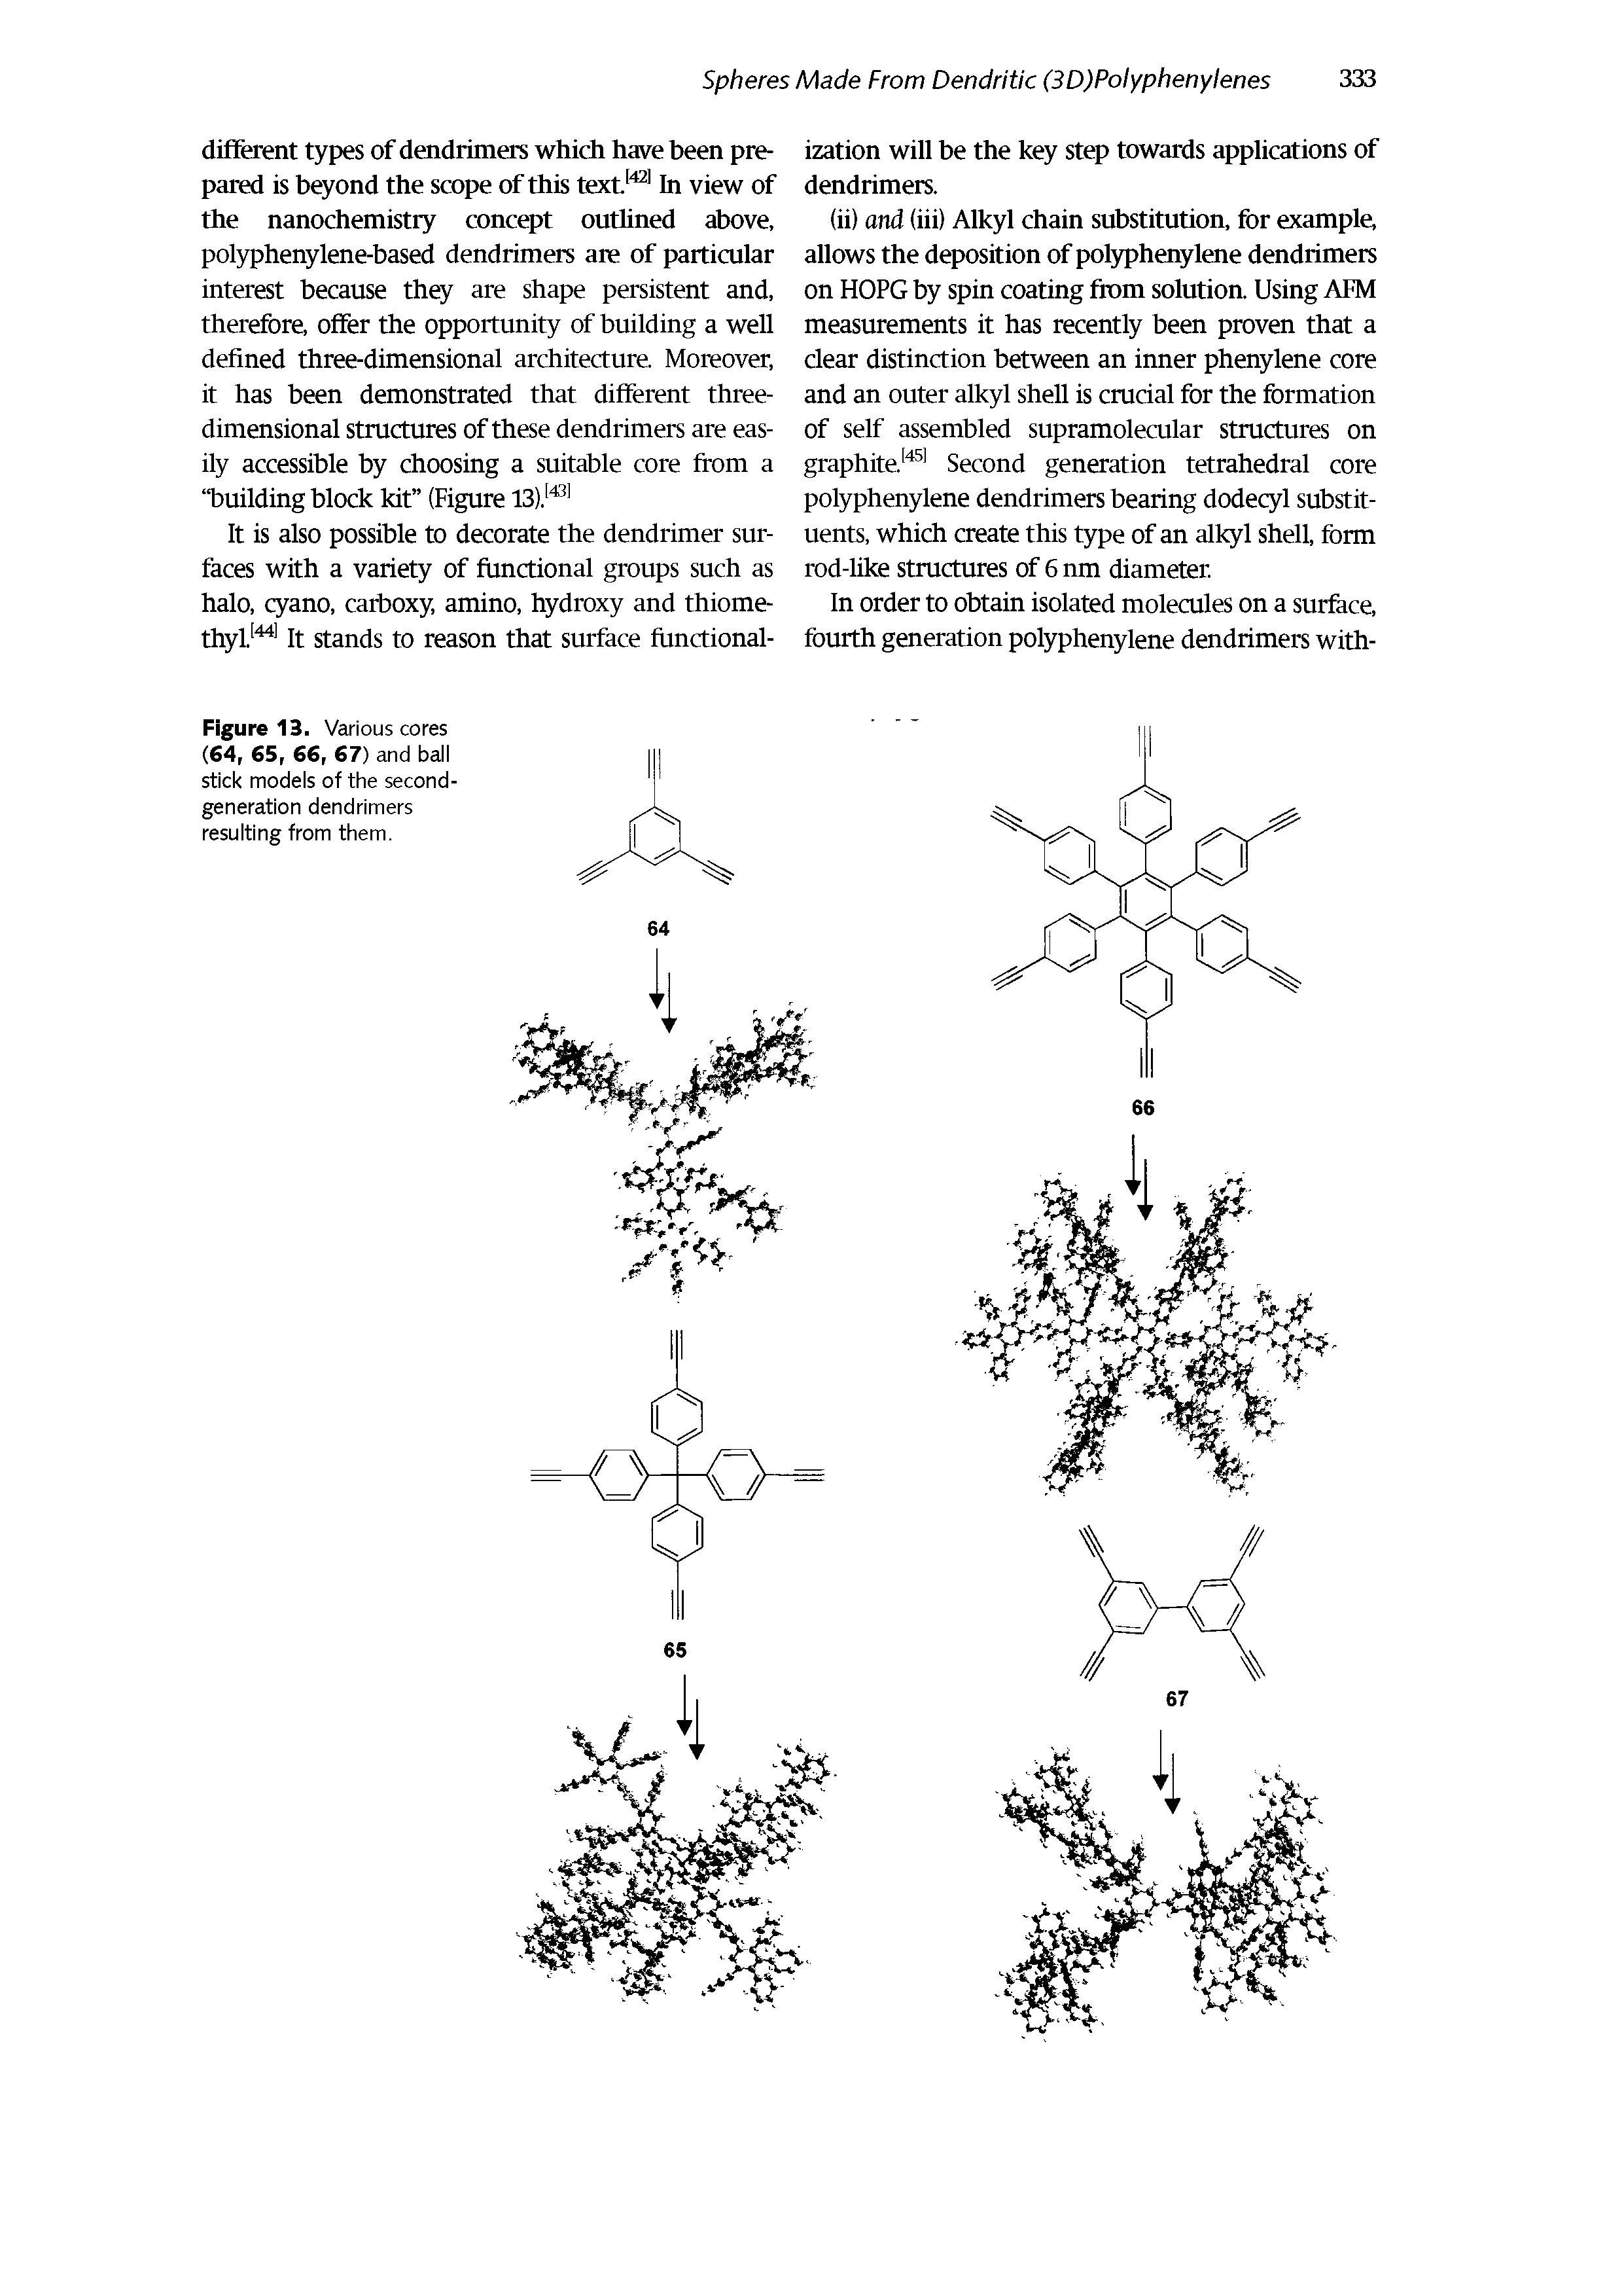 Figure 13. Various cores (64, 65, 66, 67) and ball stick models of the second-generation dendrimers resulting from them.